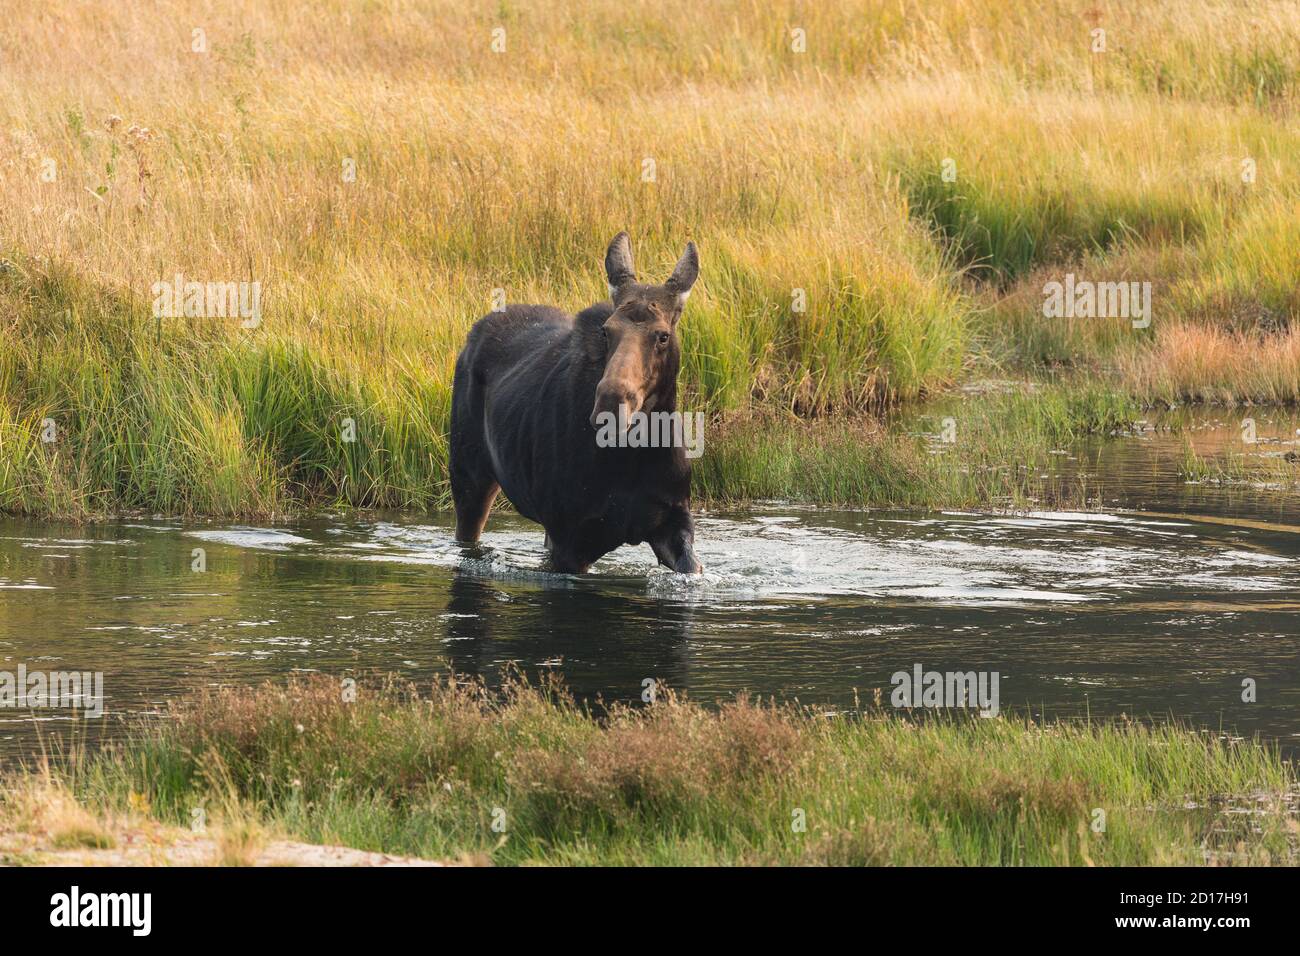 Ein Kuhelch, Alces alces, überquert den Madison River im Yellowstone National Park in Wyoming. Stockfoto